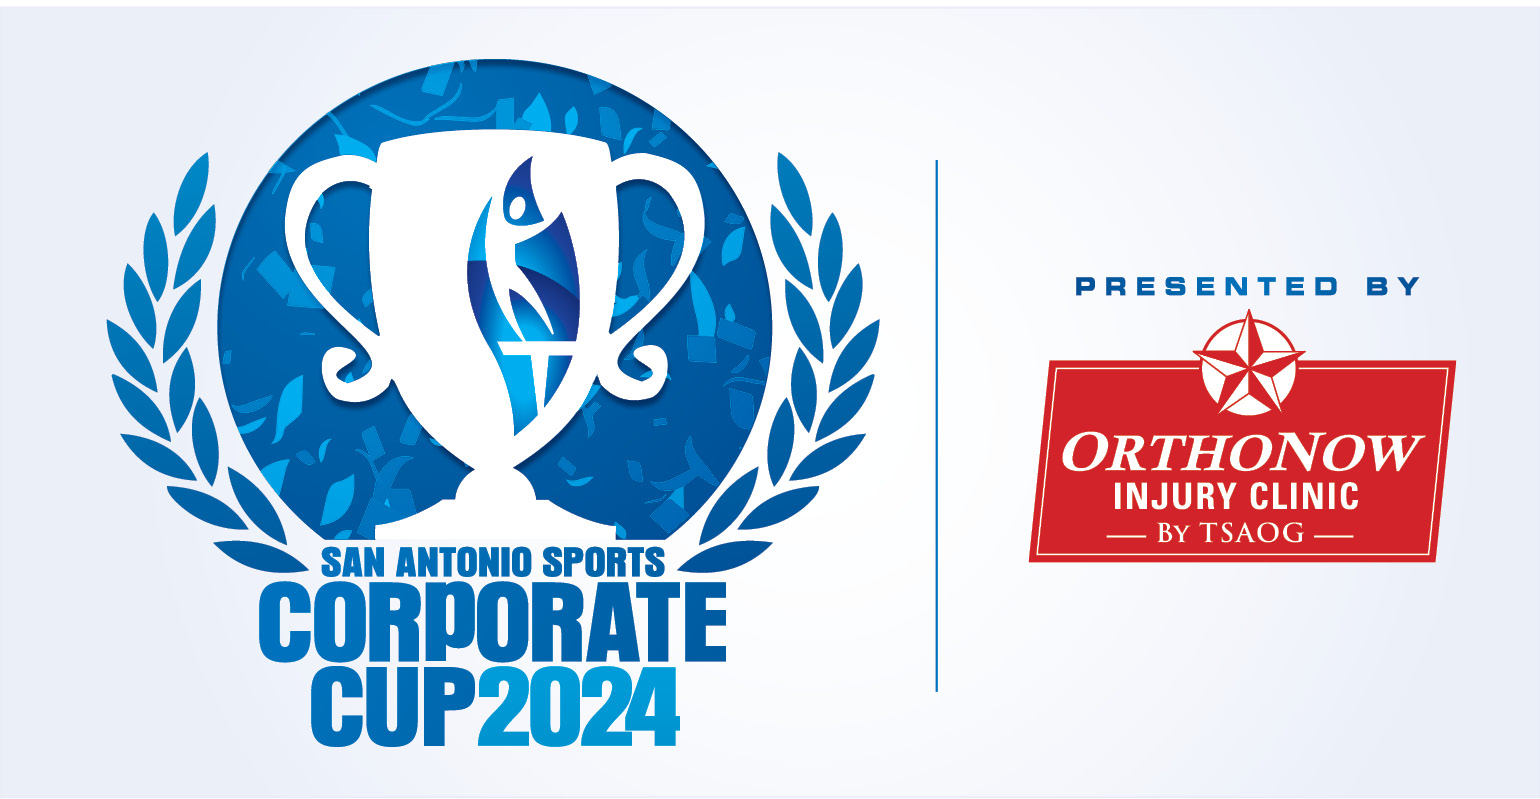 San Antonio Sports Corporate Cup presented by Orthonow